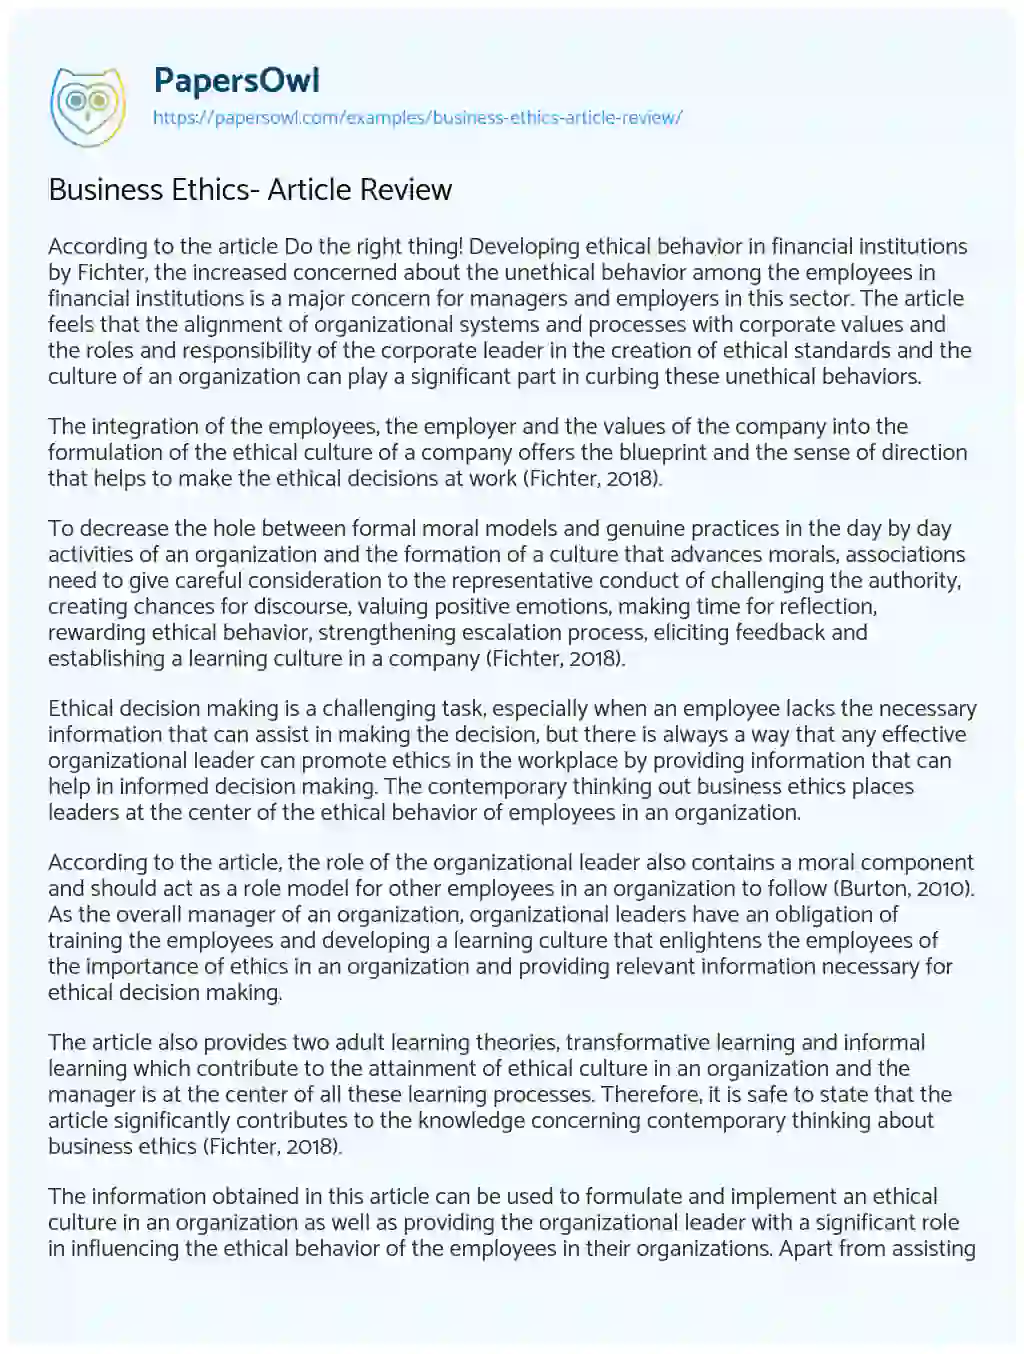 Business Ethics- Article Review essay